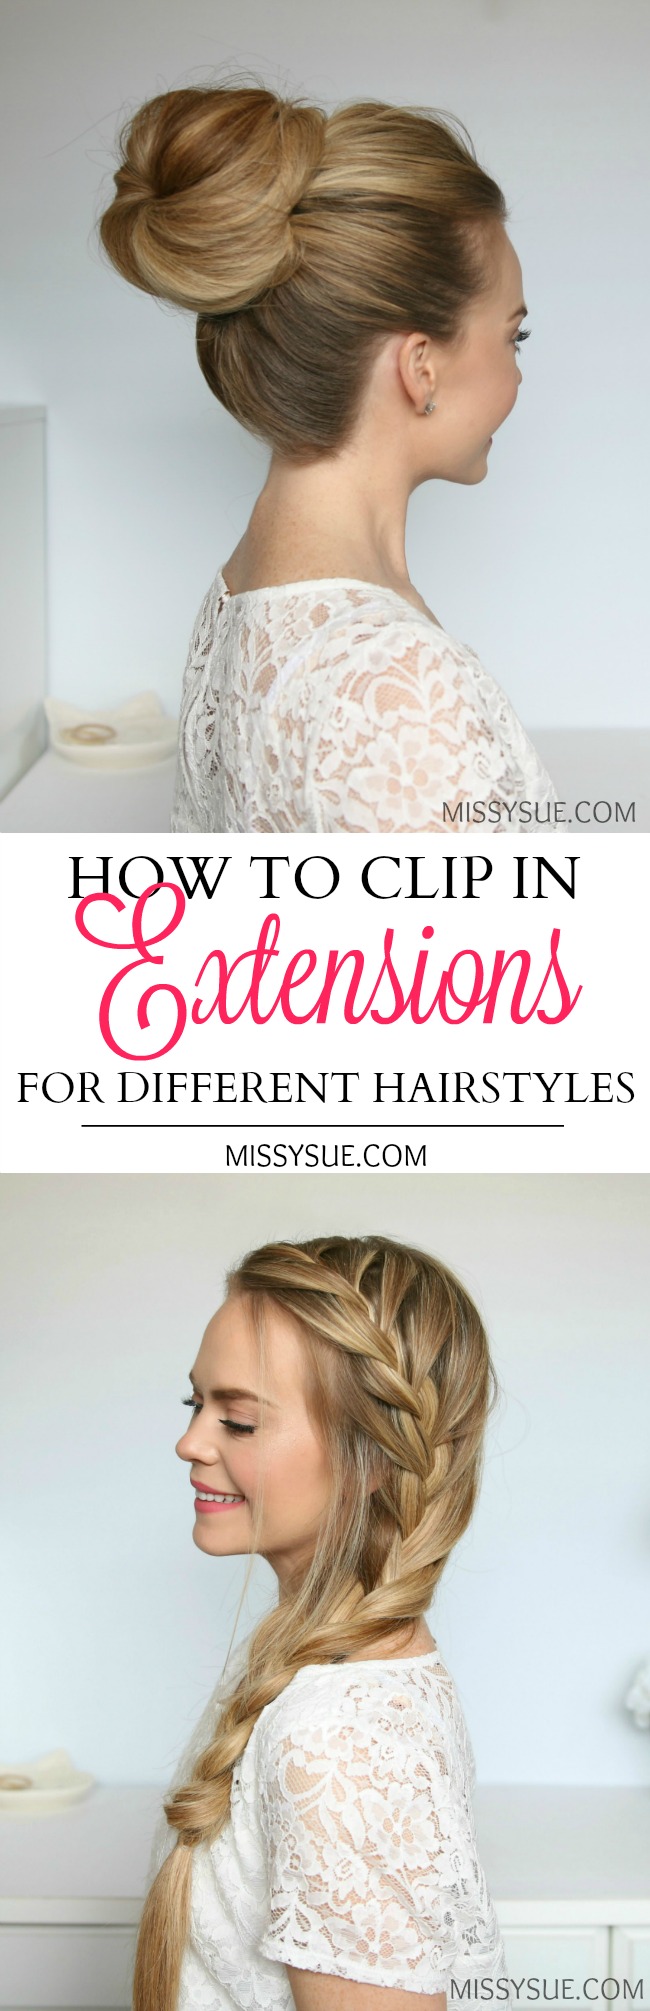 How To Clip In Extensions For Different Hairstyles MISSY SUE